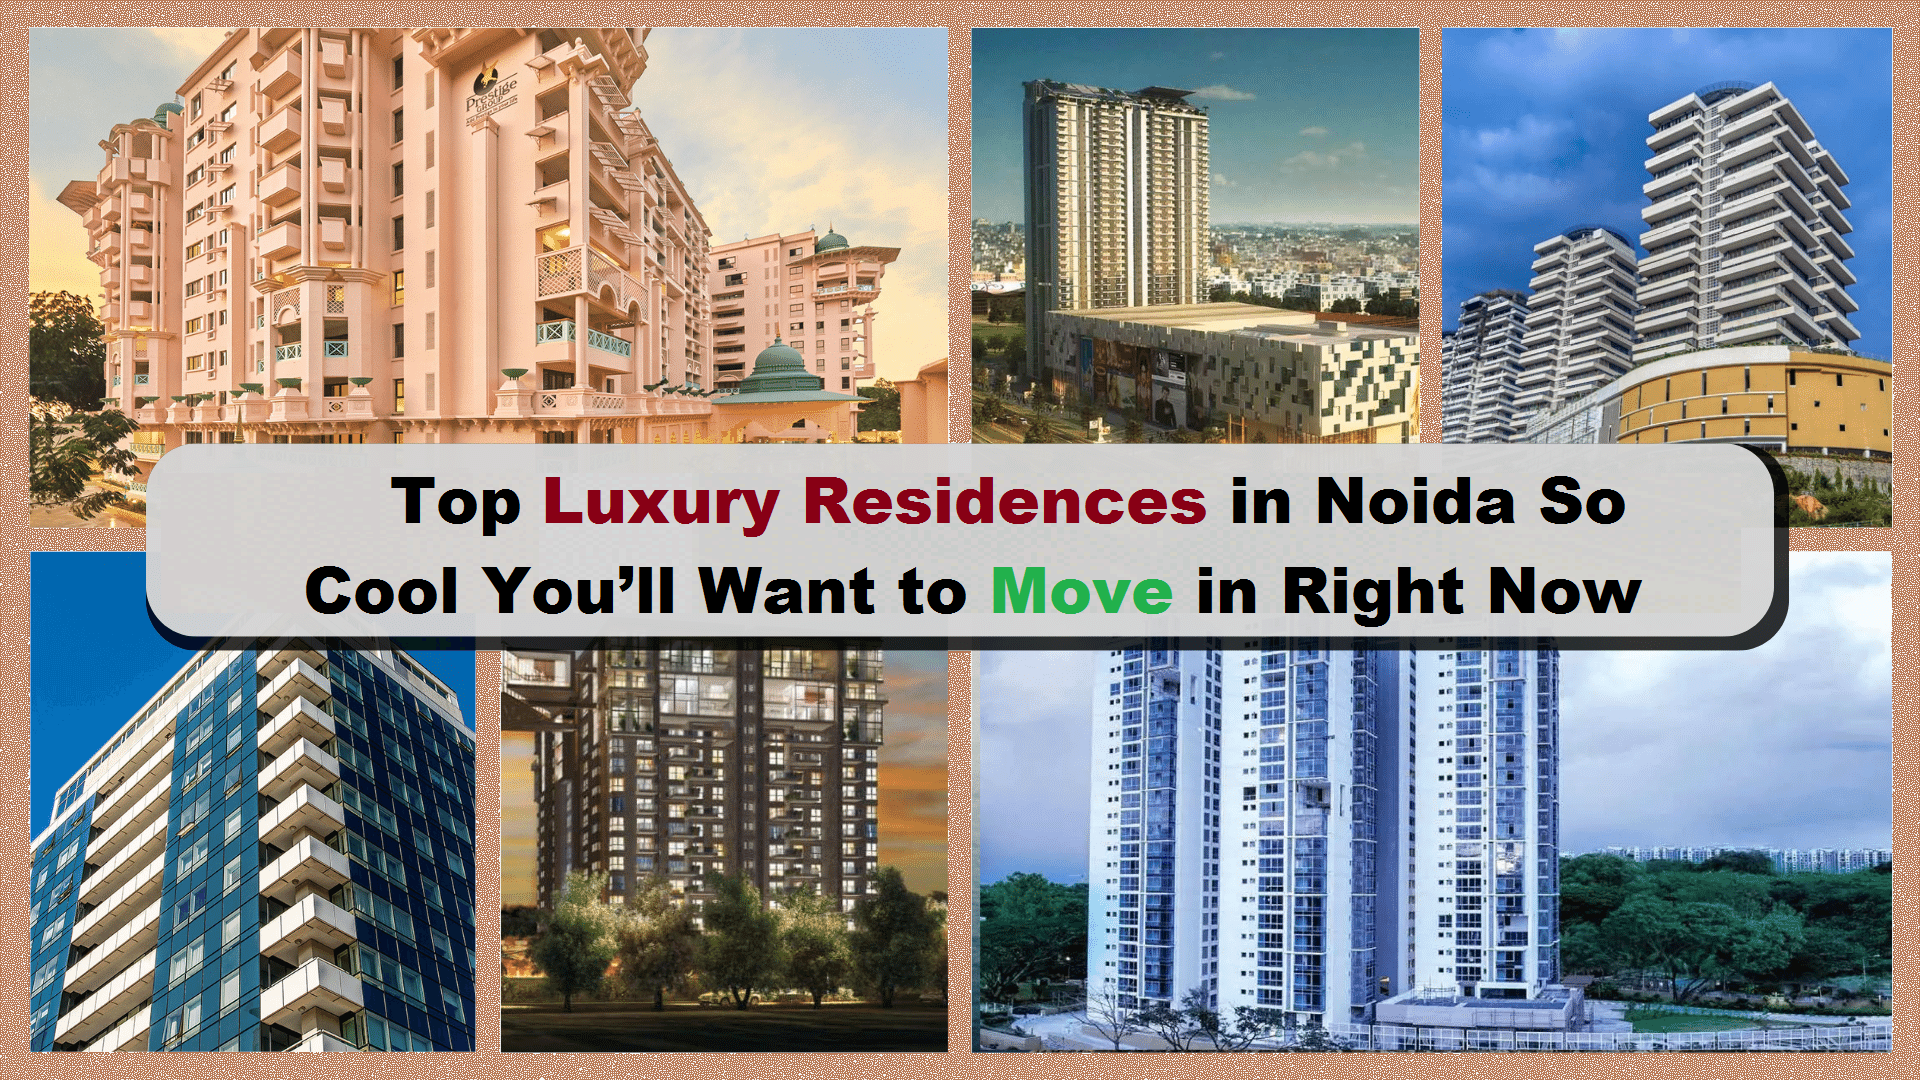 Noida is the New luxurious city Top Luxury Residences